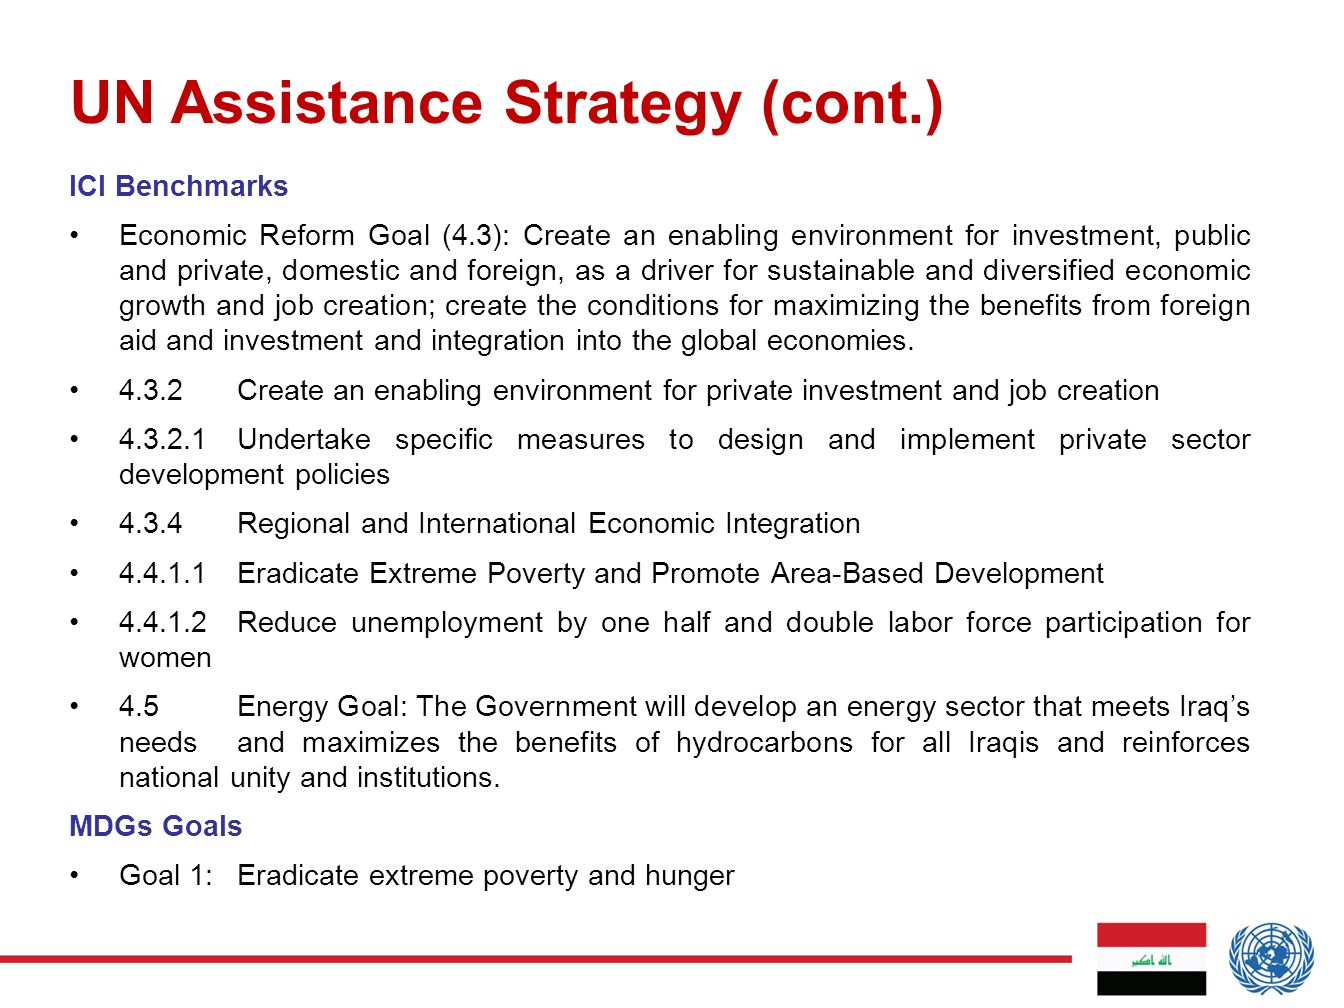 ICI Benchmarks Economic Reform Goal (4.3): Create an enabling environment for investment, public and private, domestic and foreign, as a driver for sustainable and diversified economic growth and job creation; create the conditions for maximizing the benefits from foreign aid and investment and integration into the global economies.